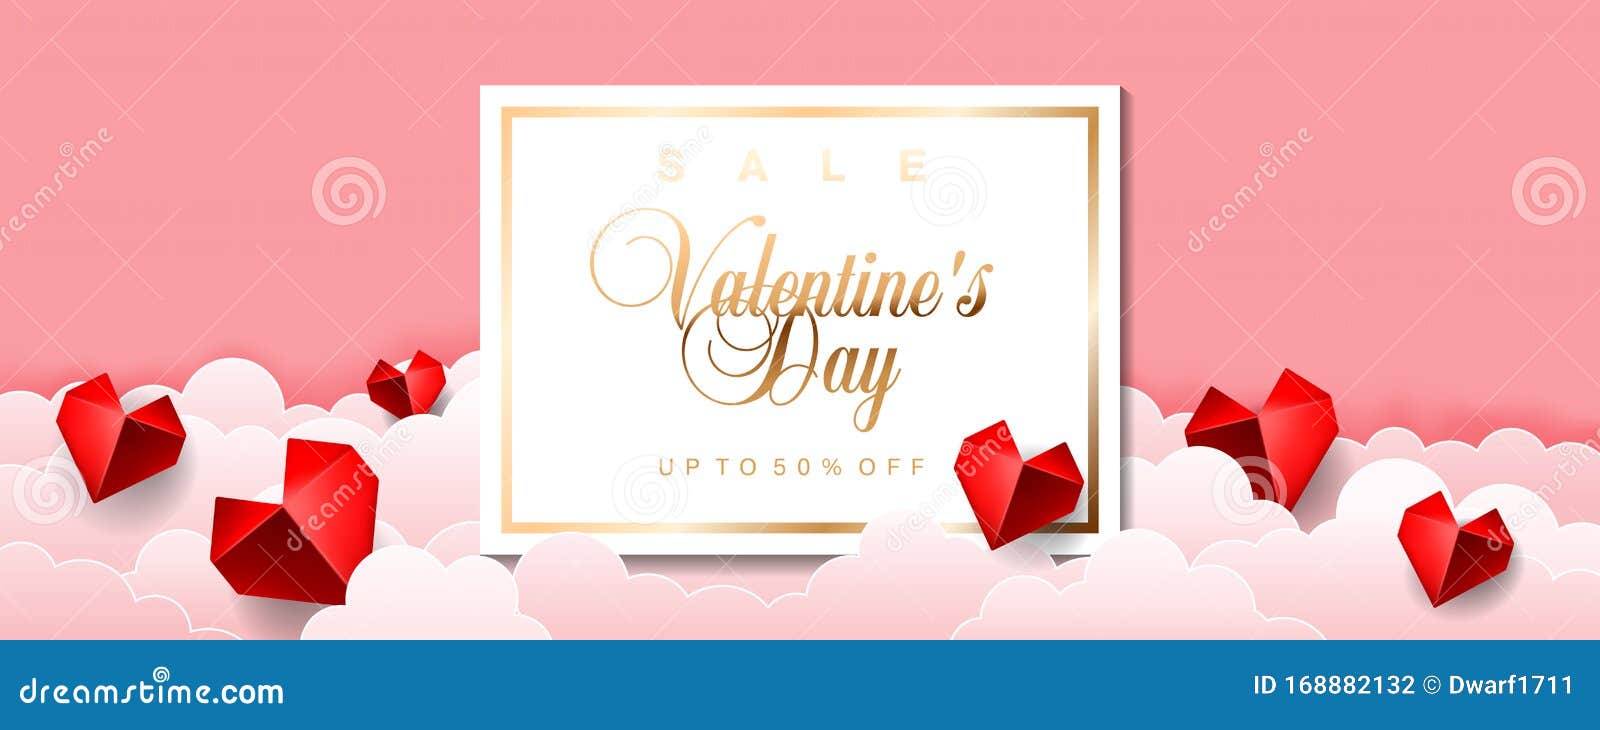 Valentines Day sale special offer discount vector illustration banner flyer poster voucher website header template with origami paper red hearts and clouds on pink background 